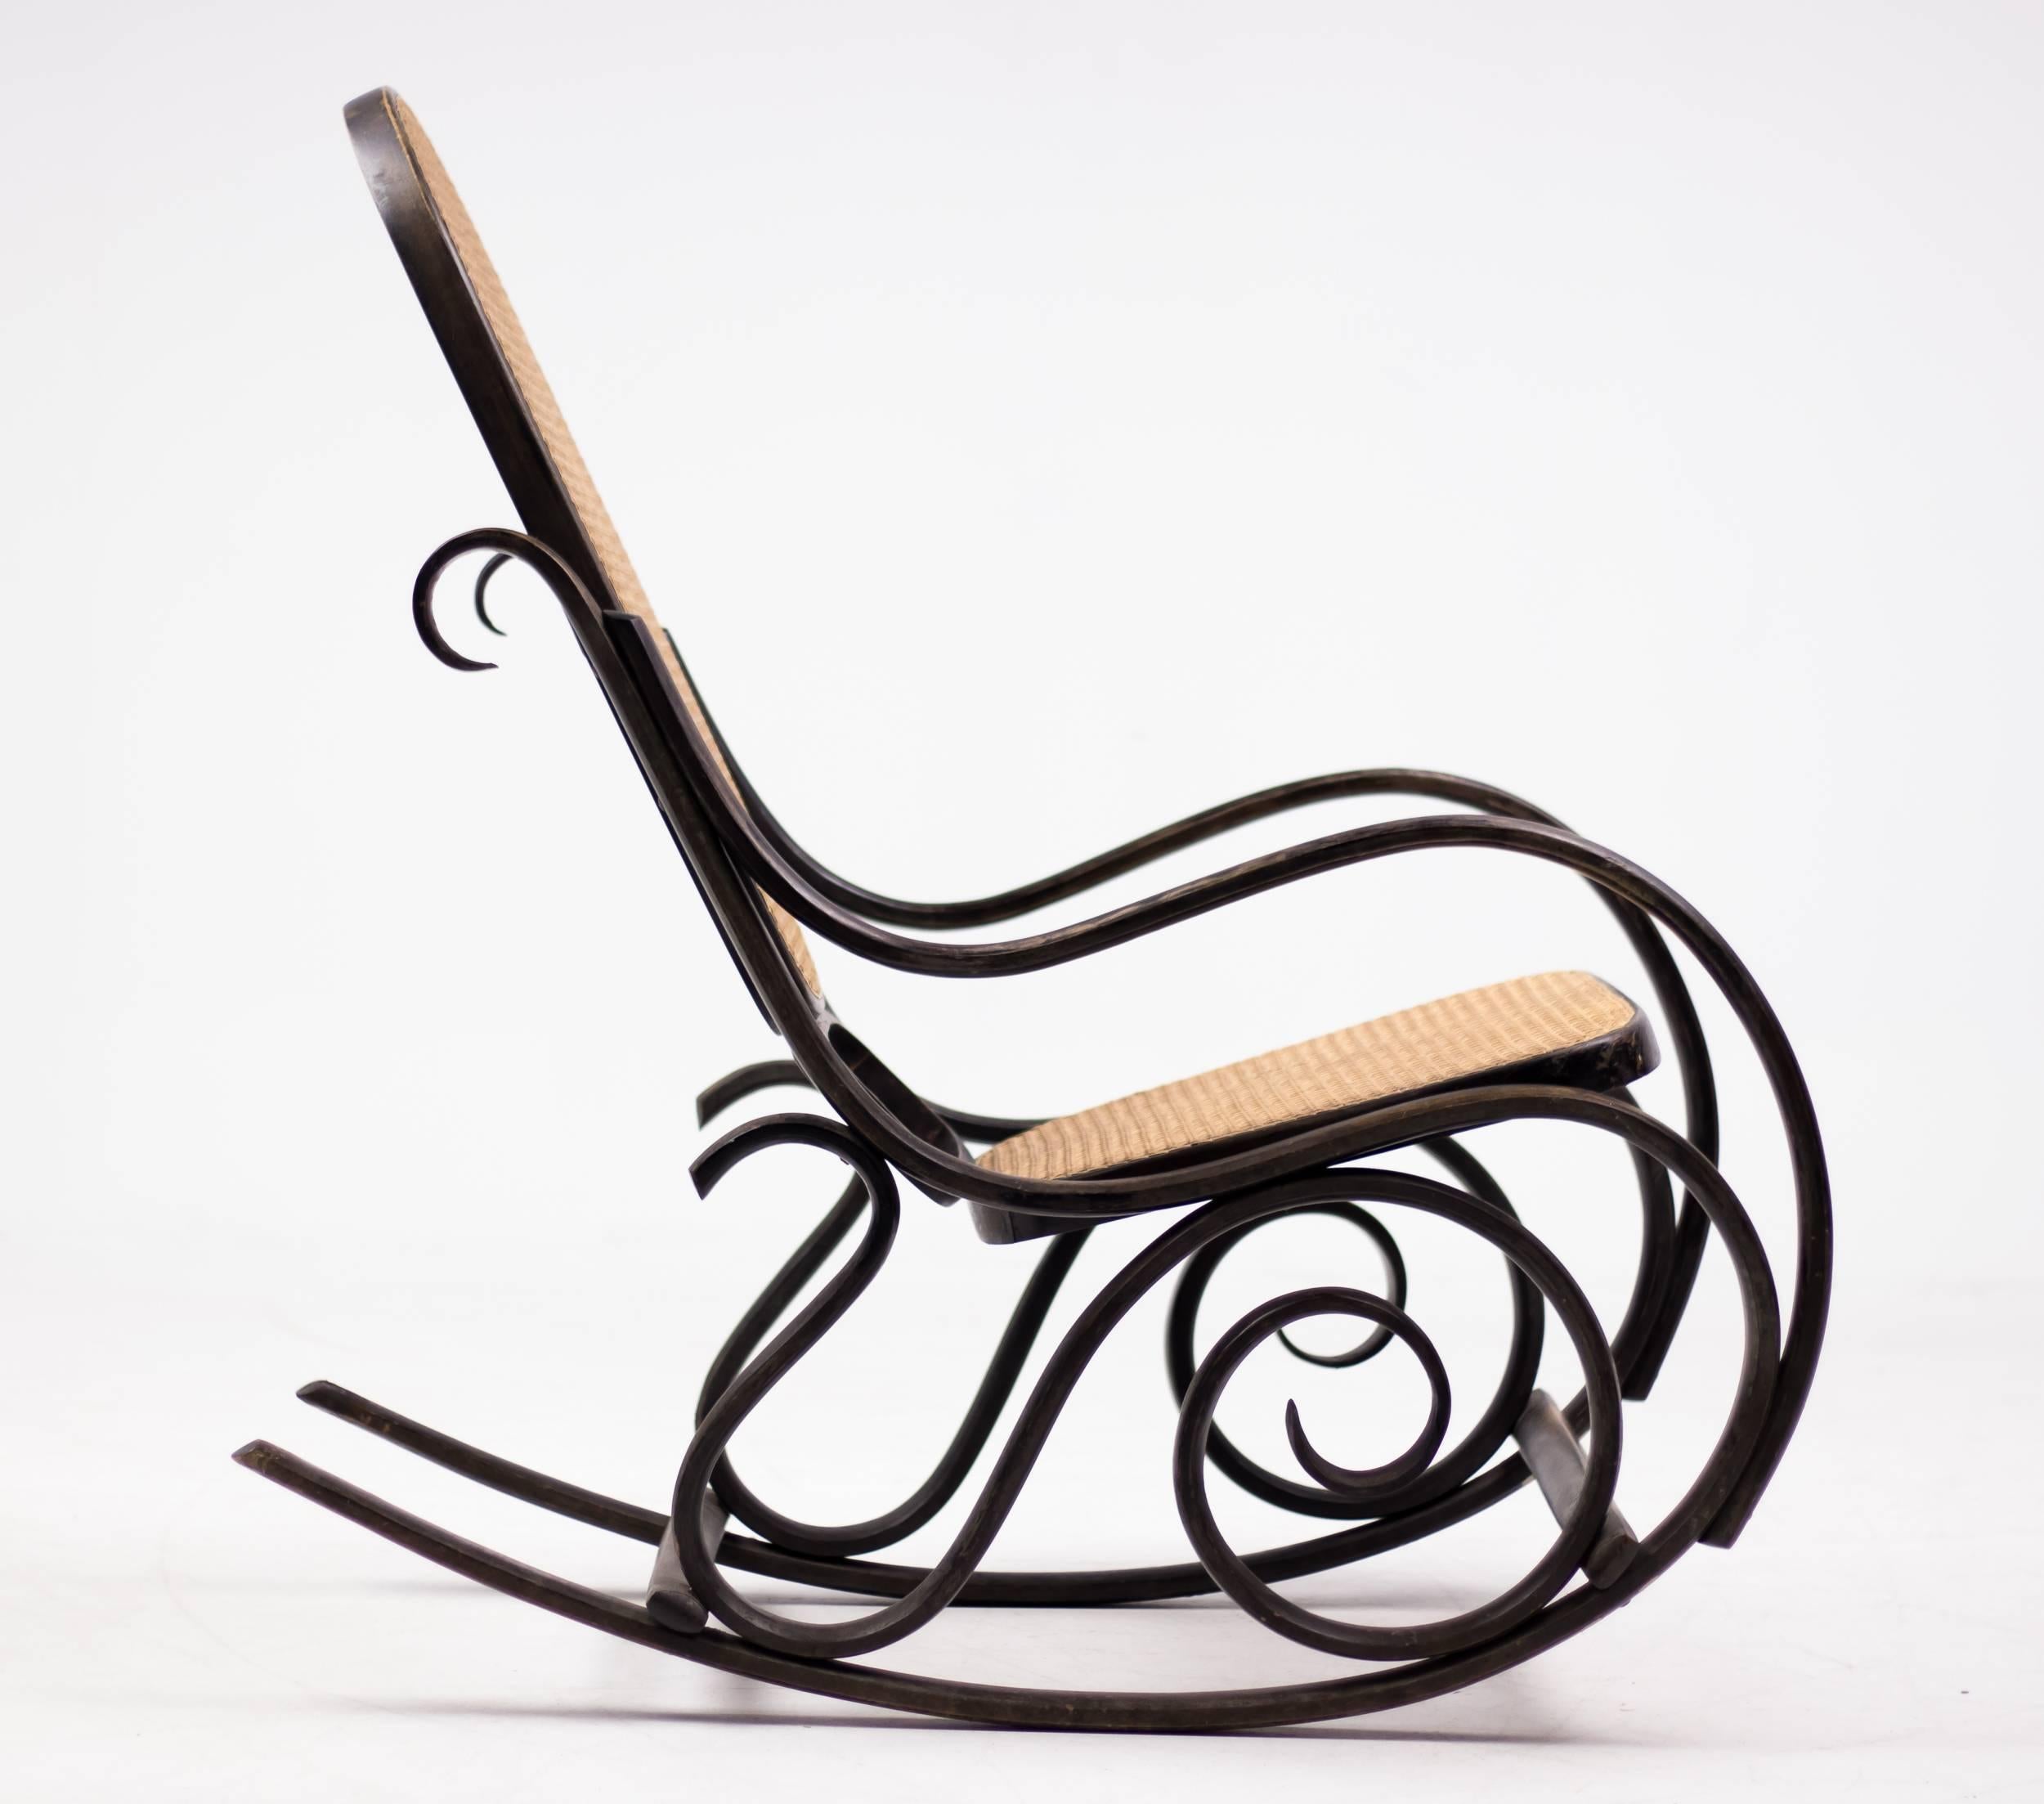 Antique Thonet model #10 bentwood rocking chair. The maker of this early 20th century rocker was Salvatore Leone from Modena, Northern Italy. The Leone's where, besides furniture making, also into coach building, cabinetmaking and boat building.